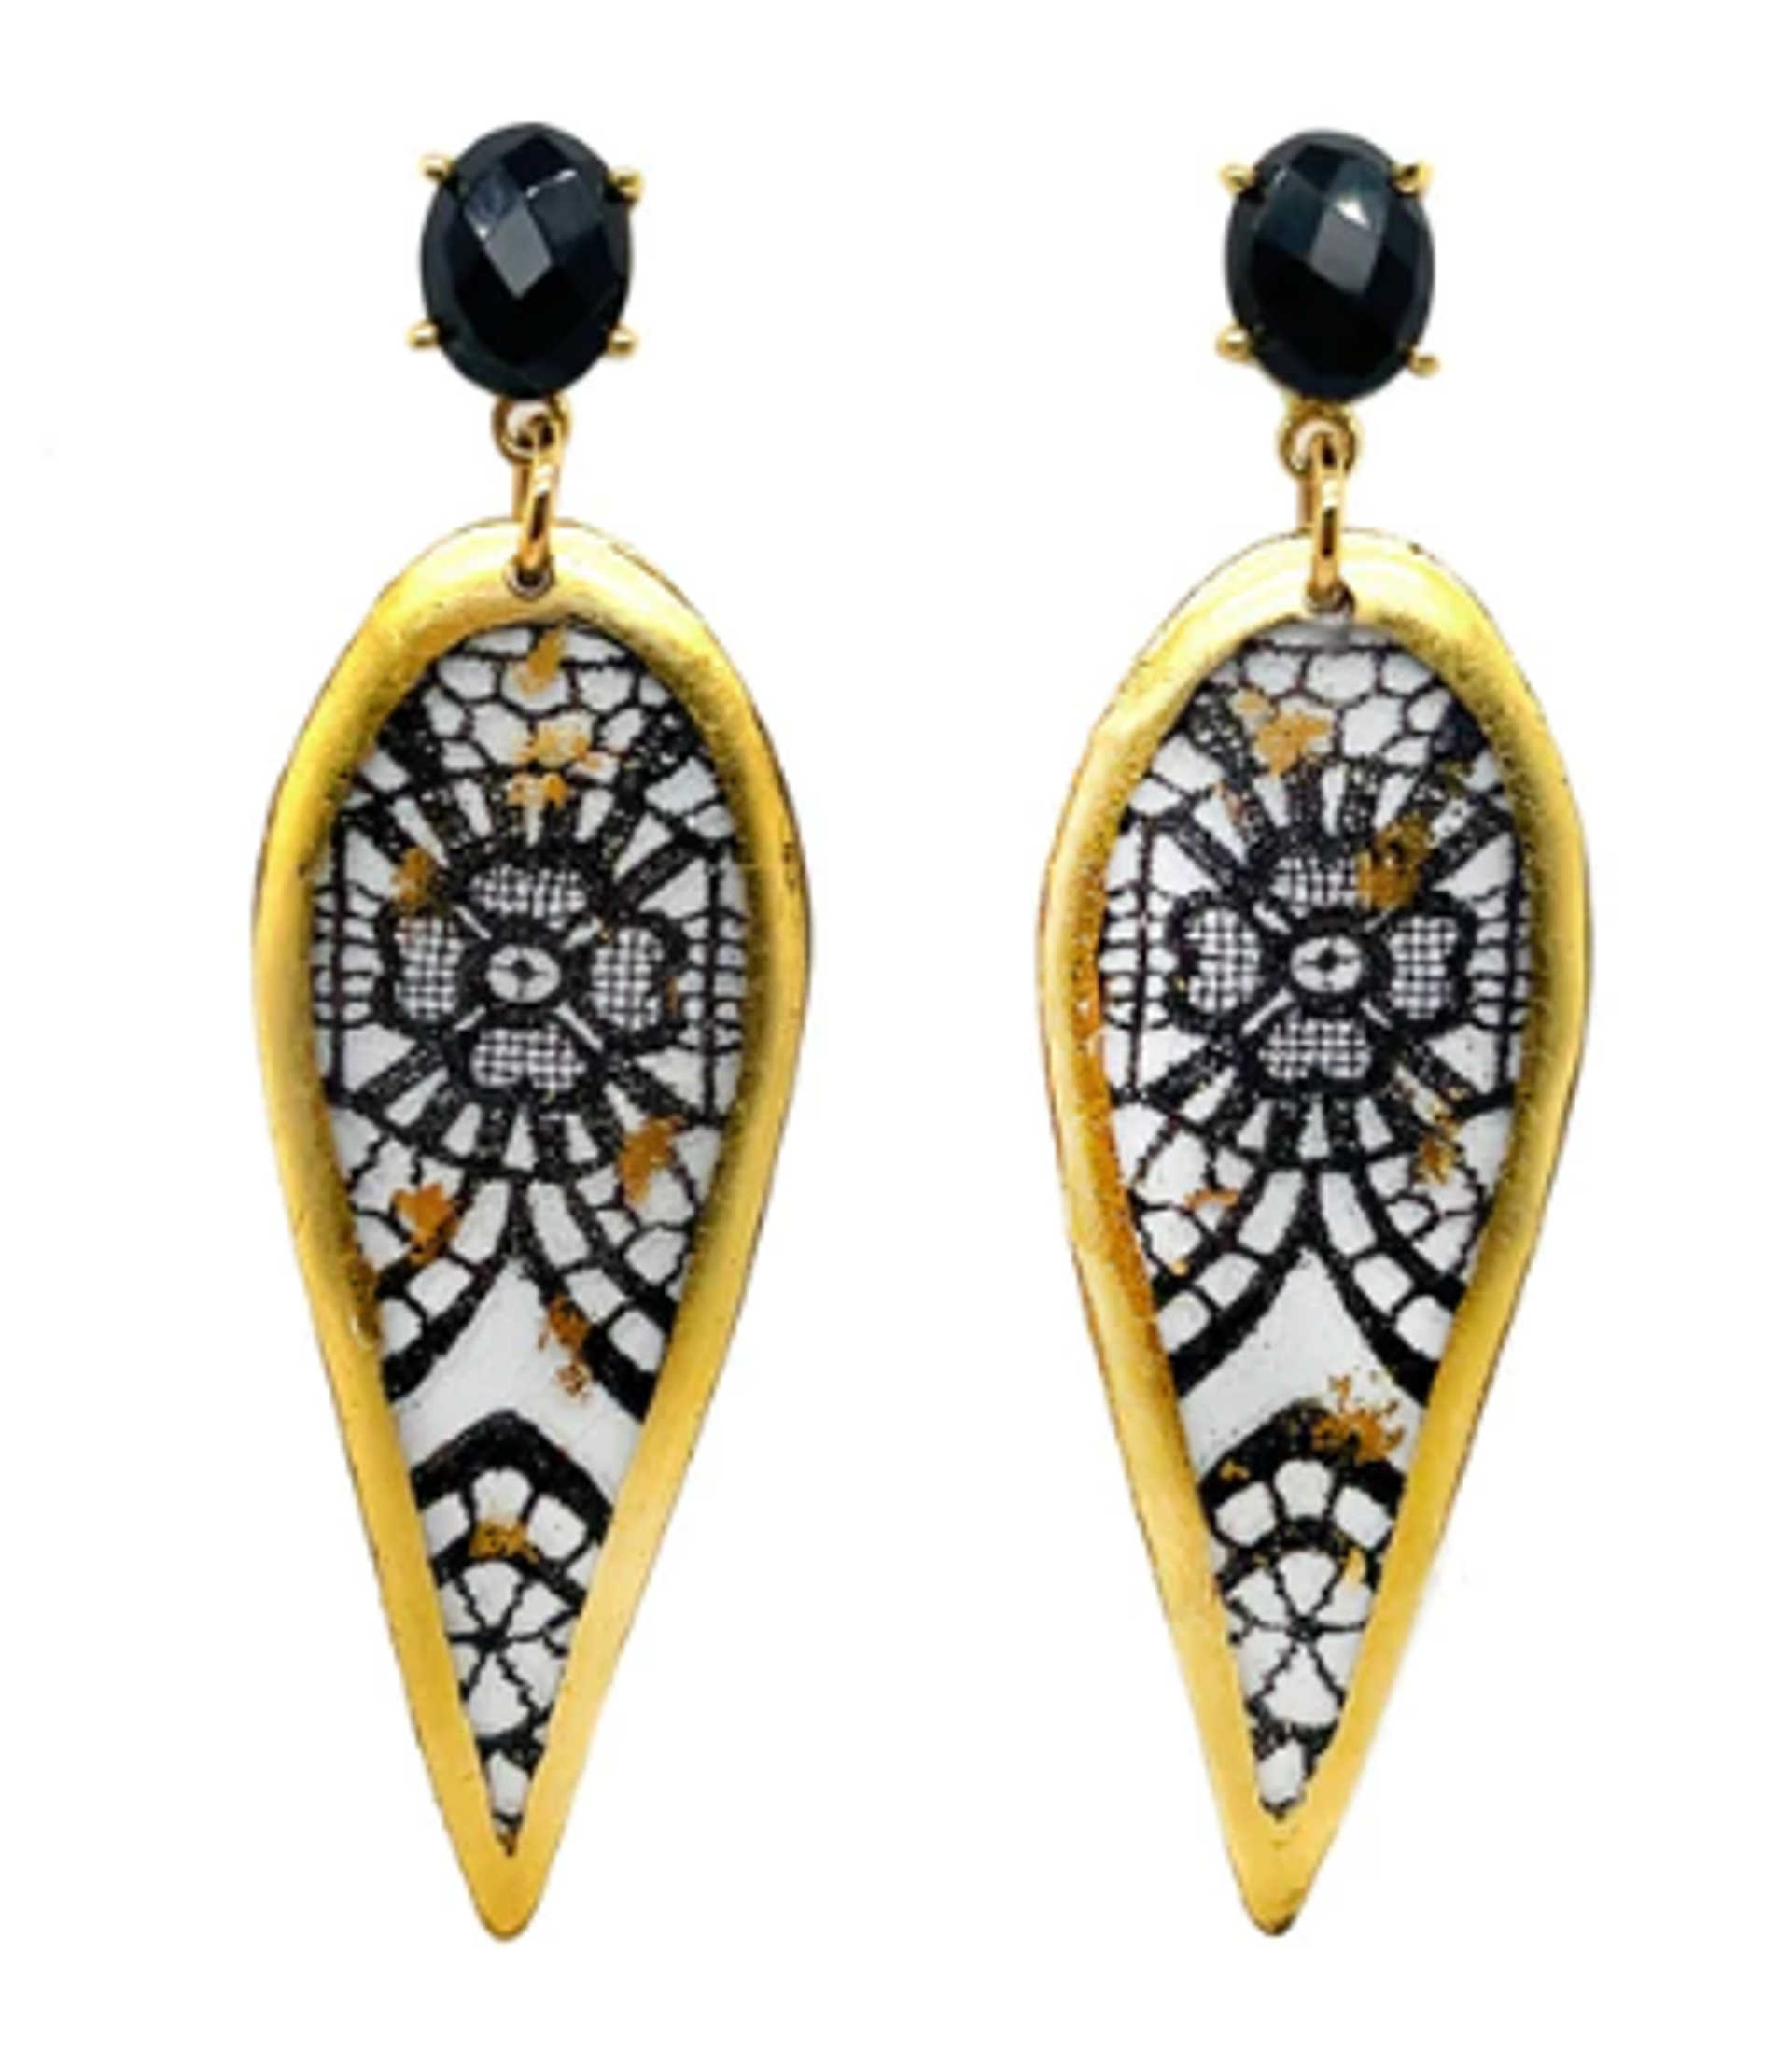 Black Lace Wing Earrings with Onyx by Evocateur